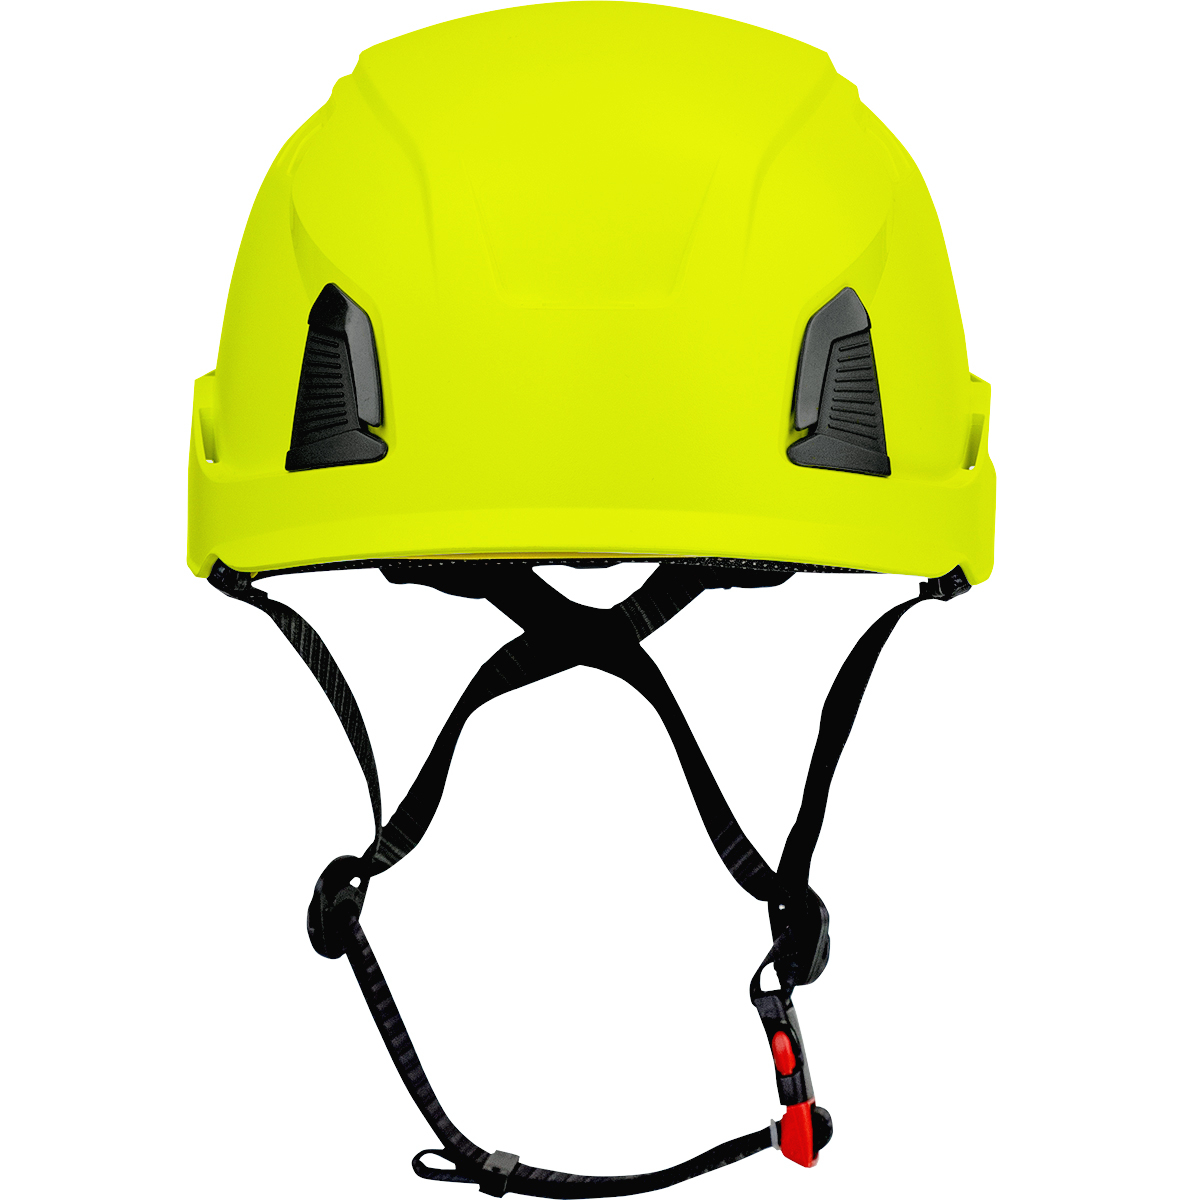 PIP® 280-HP1491RM-01 Traverse™ Industrial Climbing Helmet with Mips® Technology, Polycarbonate/ABS Shell, EPS Foam Impact Liner, HDPE Suspension, Wheel Ratchet Adjustment and 4-Point Chin StrapTYPE II, Hi-Vis Yellow